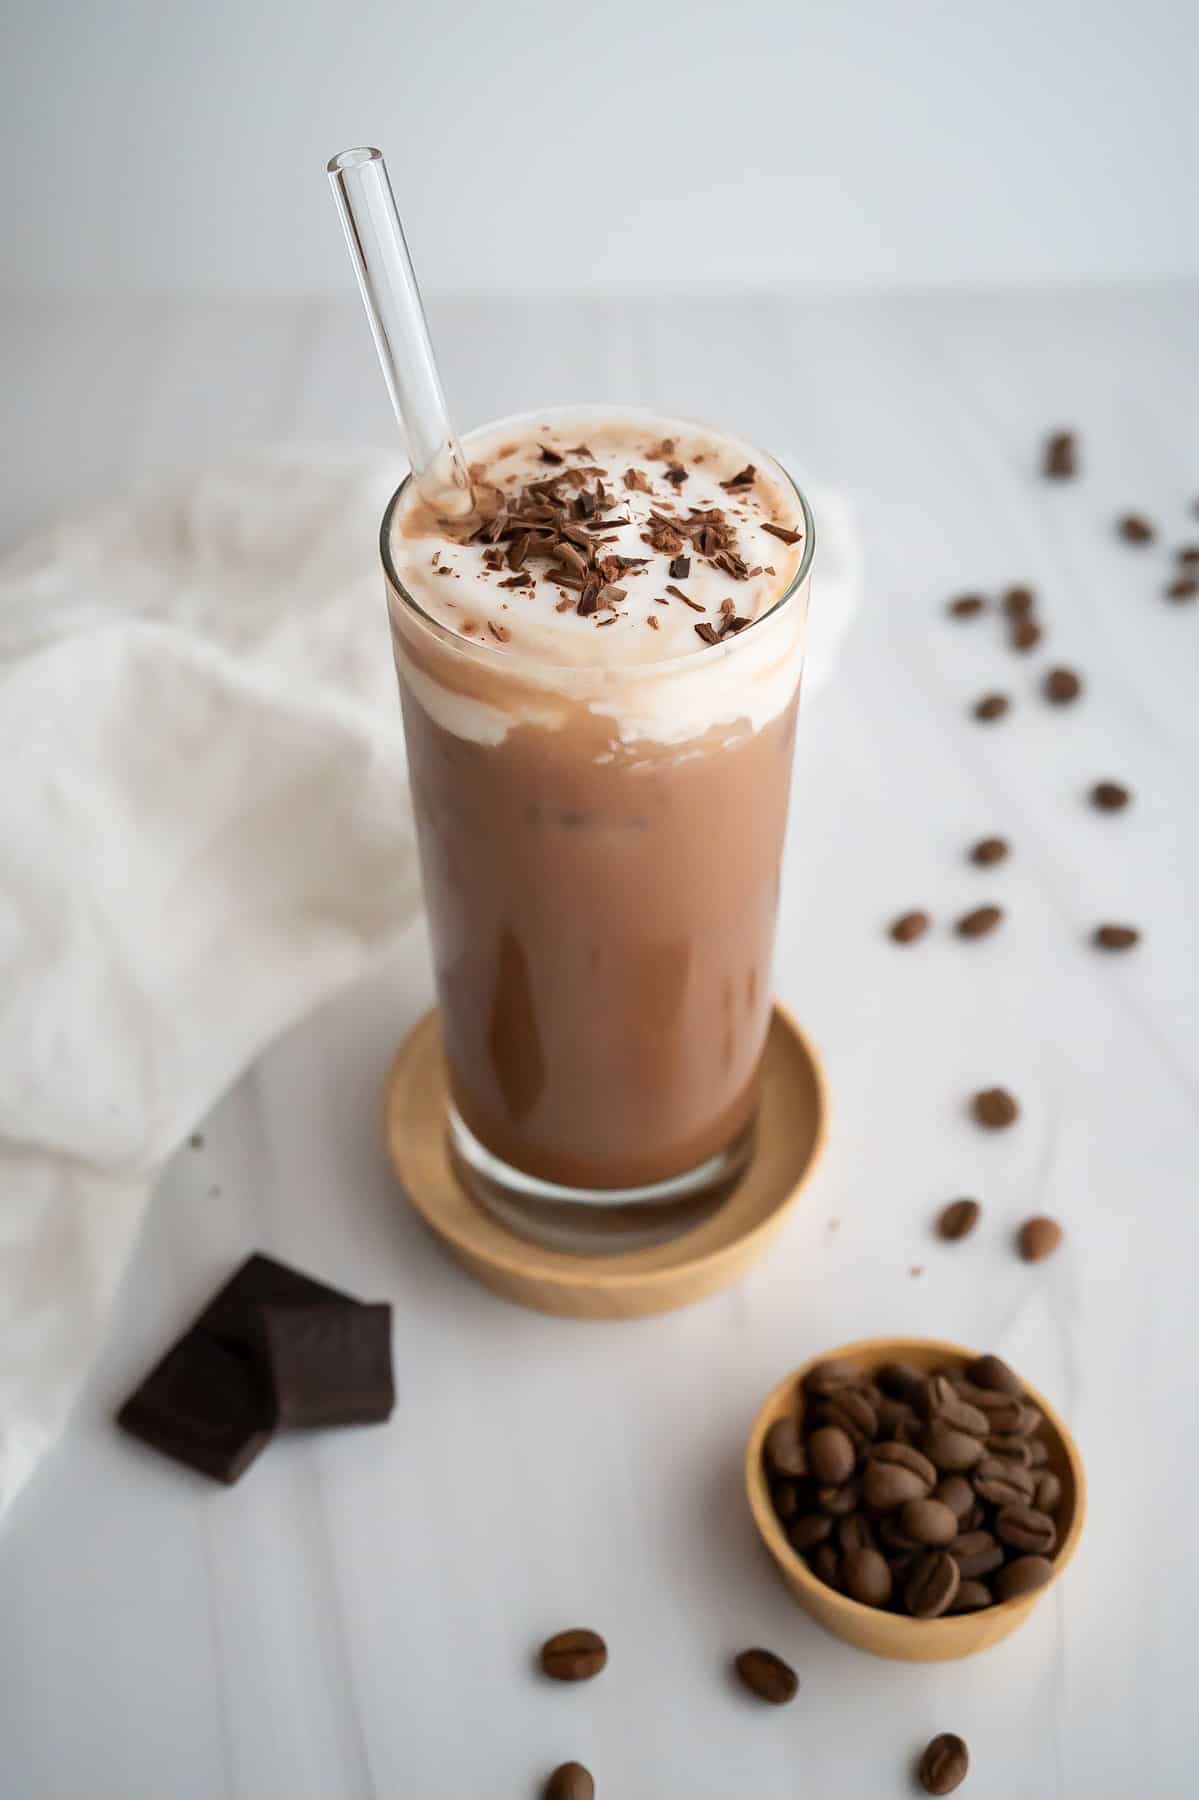 A tall glass with an iced mocha topped with whipped cream and chocolate shavings.